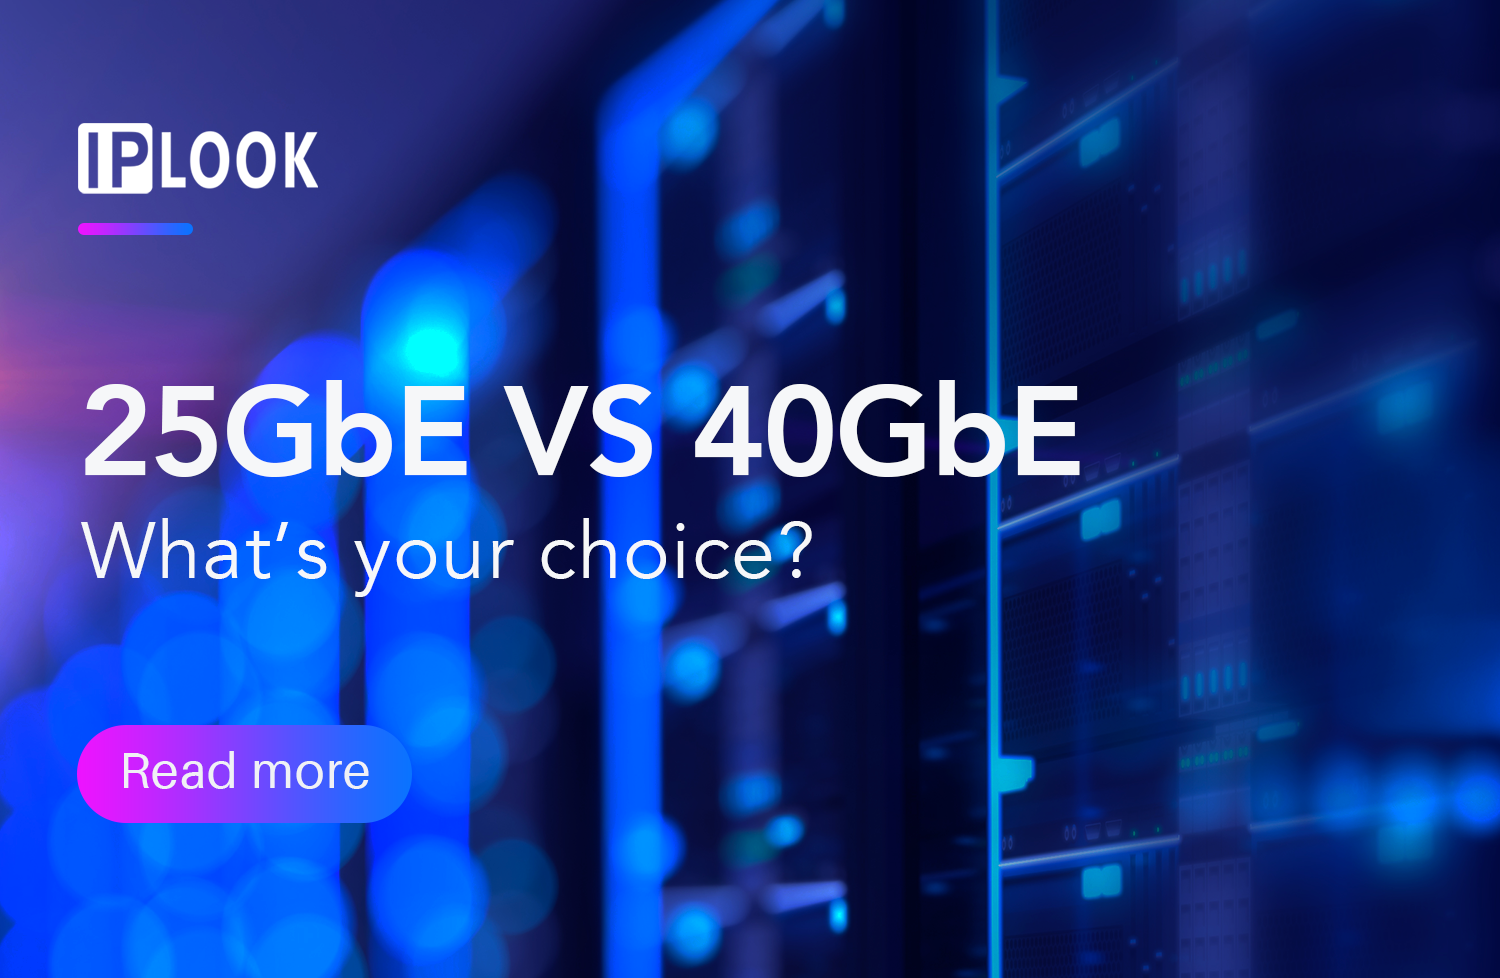 25GbE vs 40GbE. What's your choice?